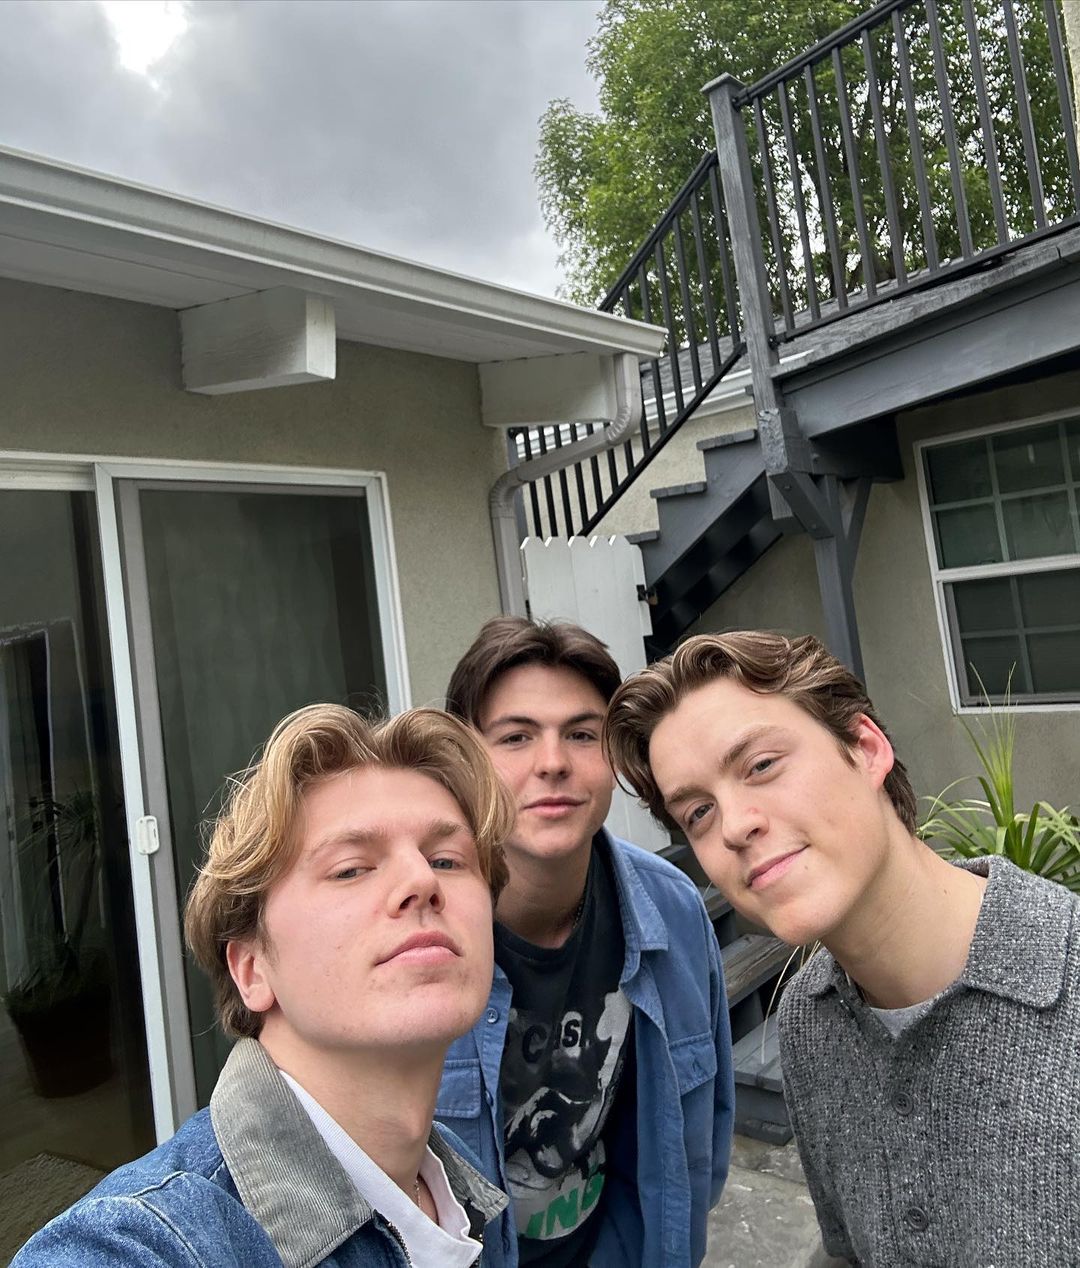 General photo of New Hope Club